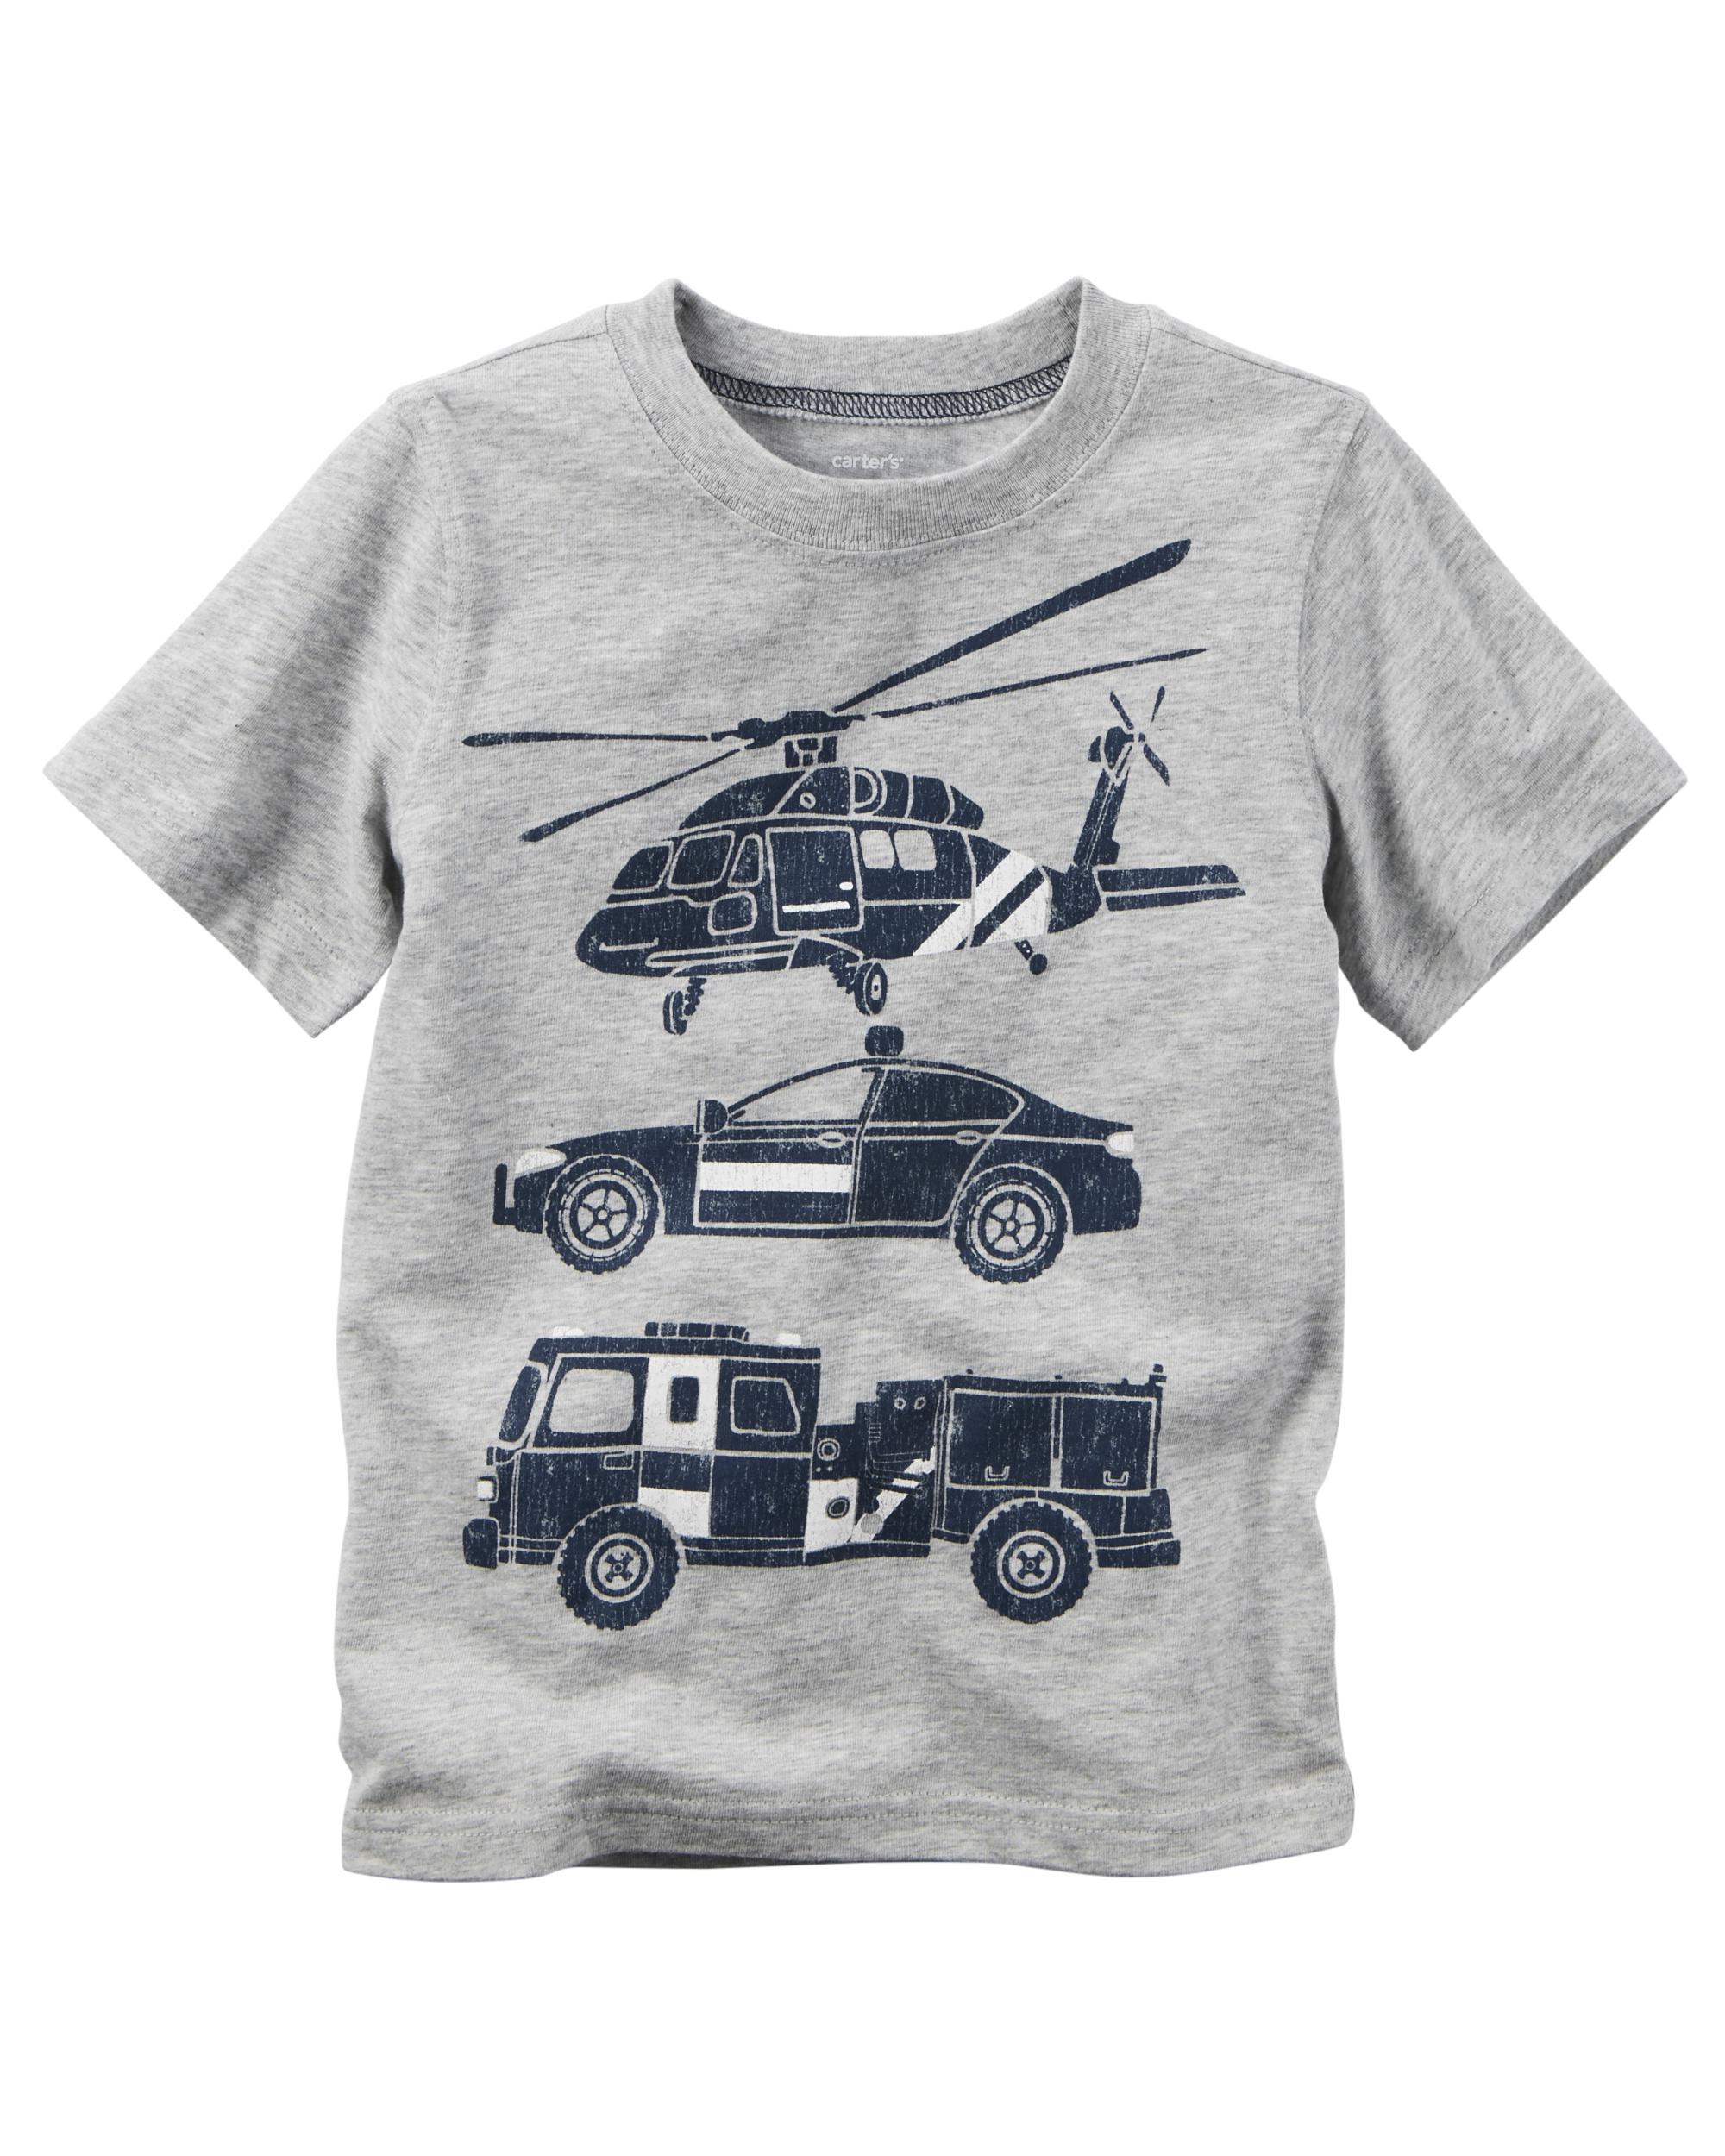 Carter's Toddler Boys' Graphic T-Shirt - Rescue - Sears